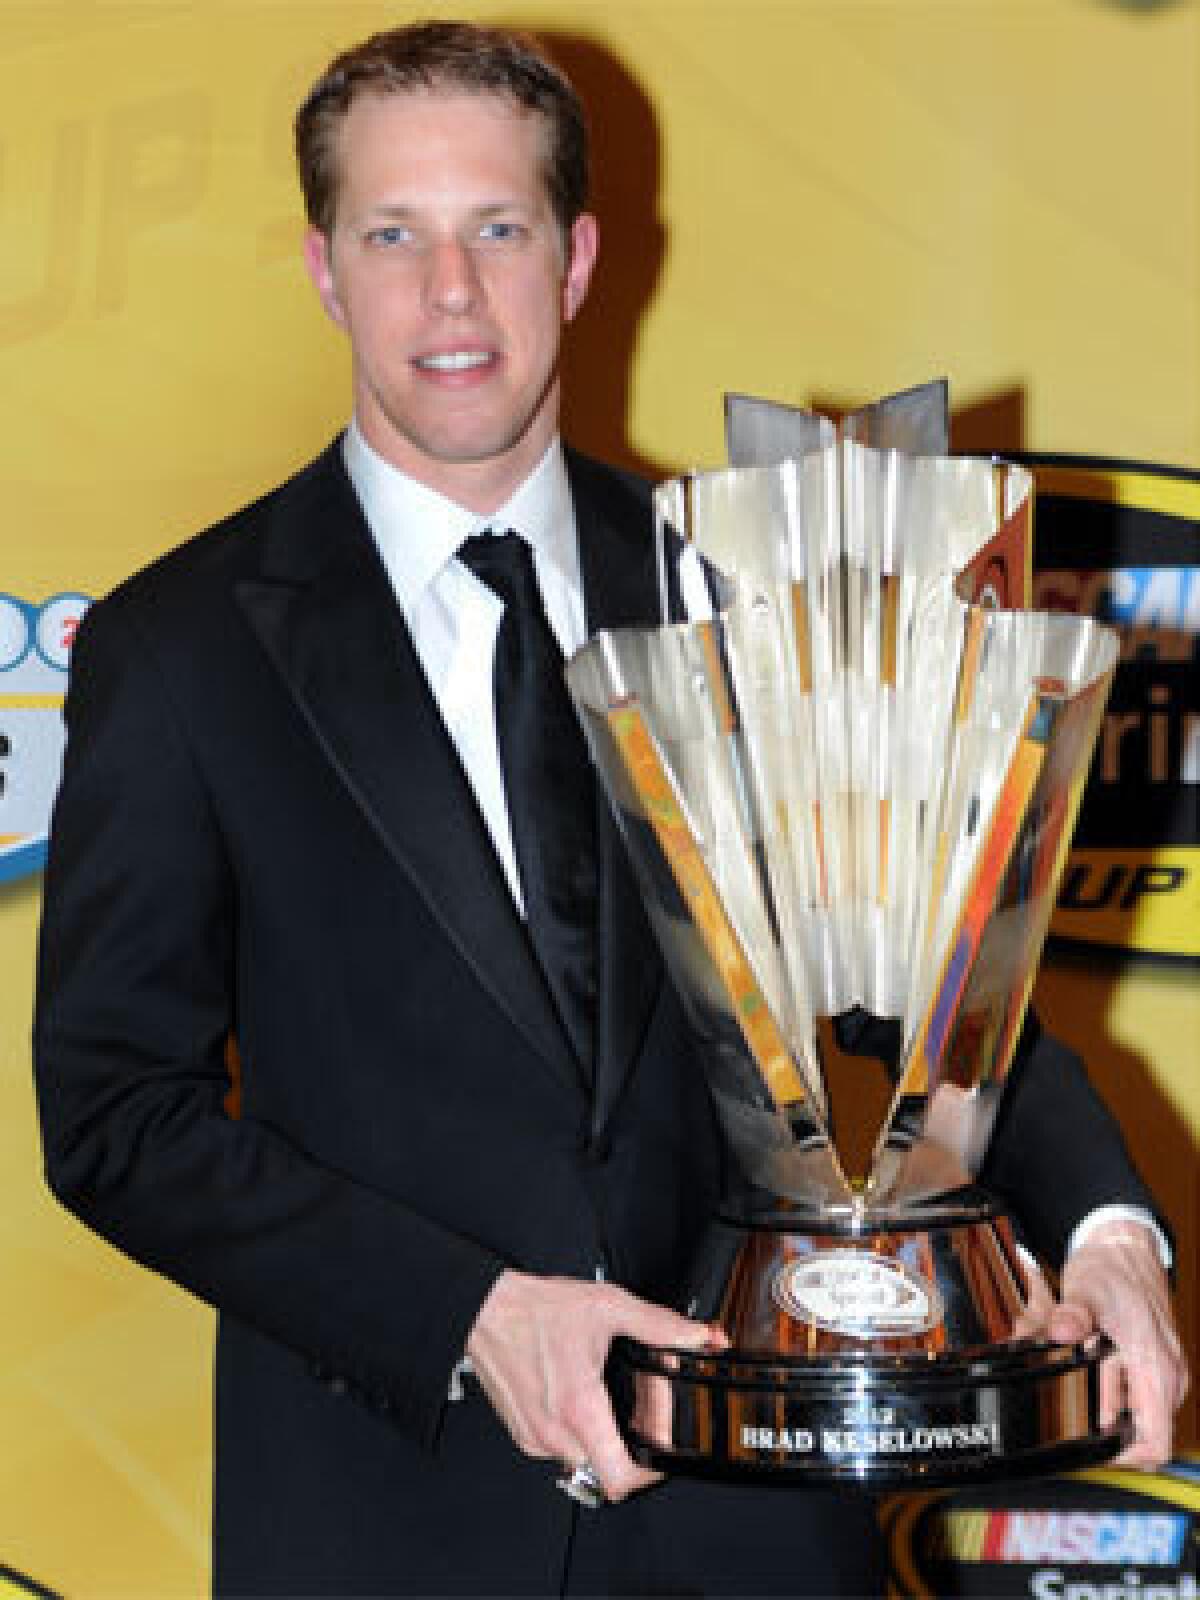 Brad Keselowski poses with his championship trophy after the NASCAR Sprint Cup Series awards ceremony at the Wynn in Las Vegas on Nov. 30.